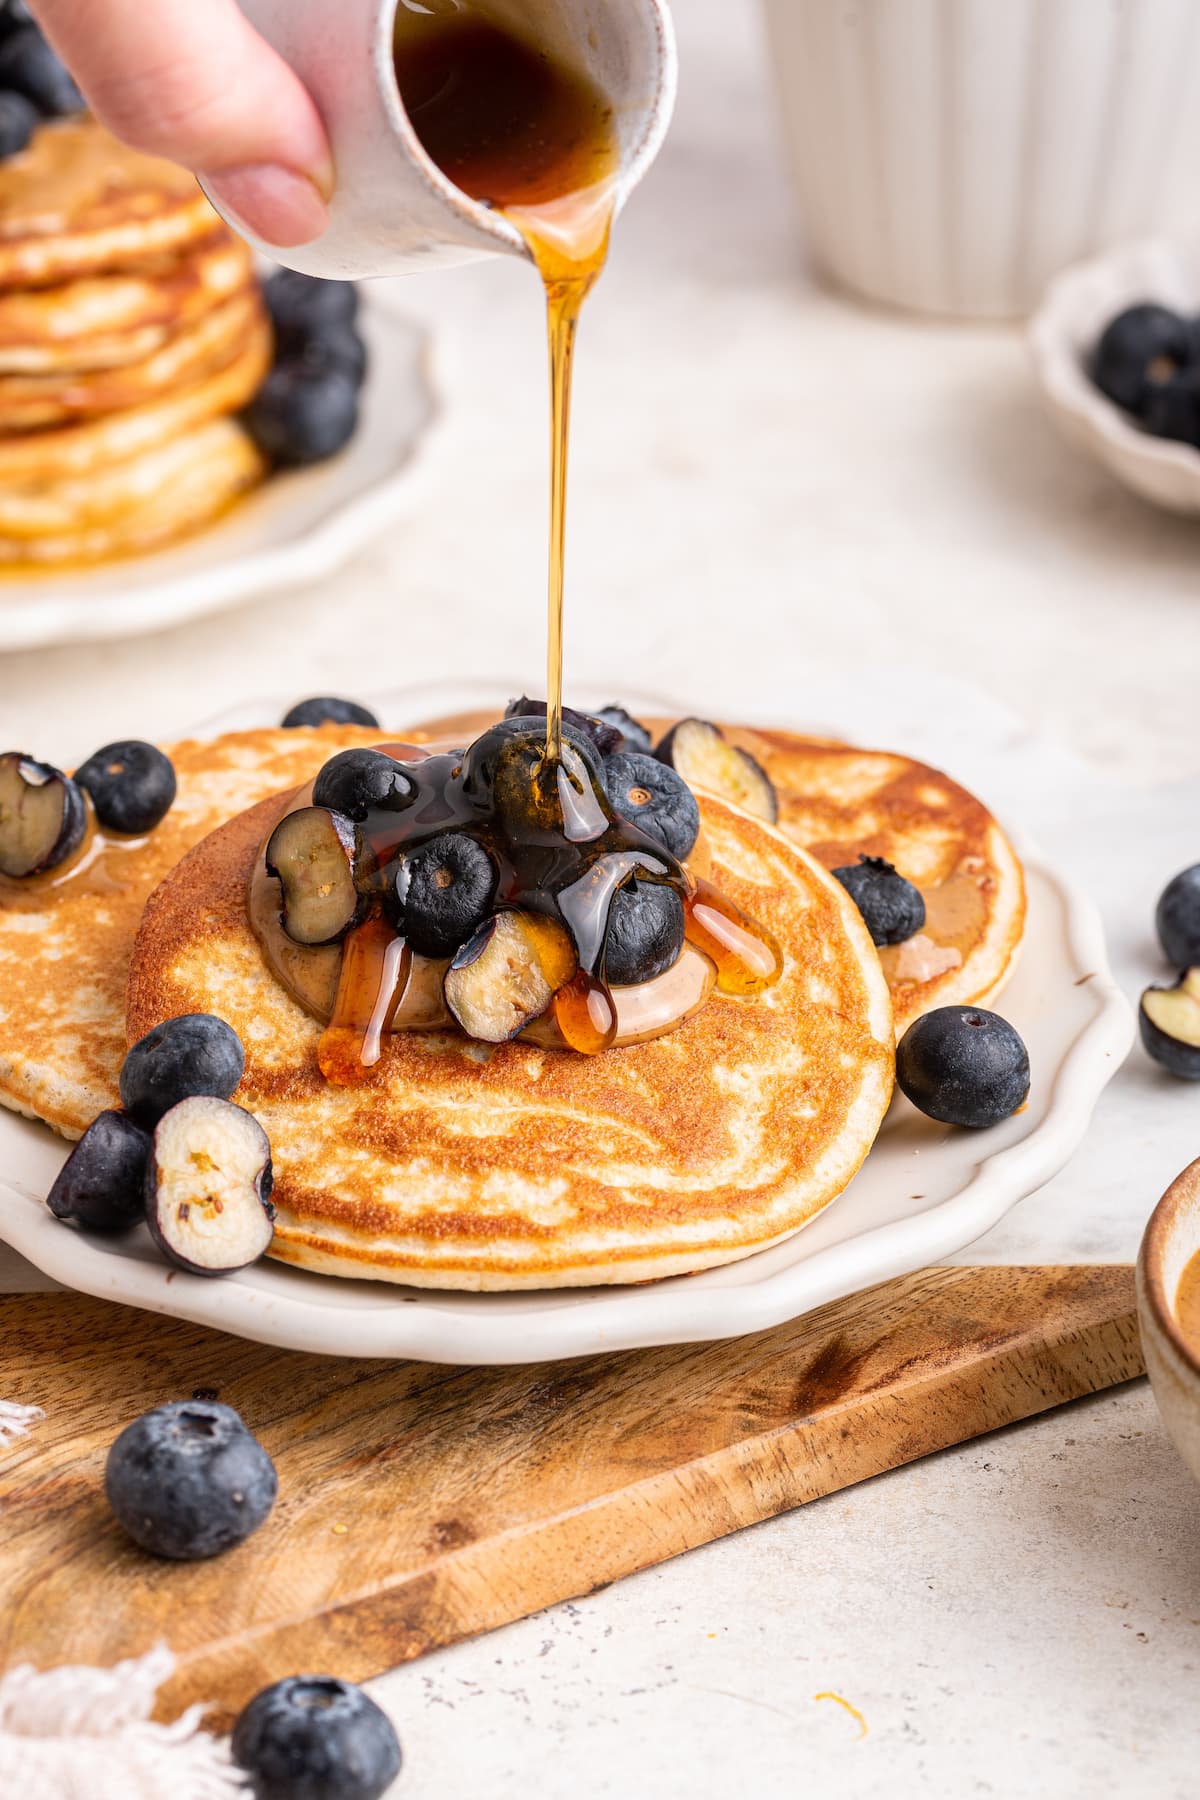 Maple syrup being drizzled onto protein pancakes that are on a plate and topped with fresh blueberries.